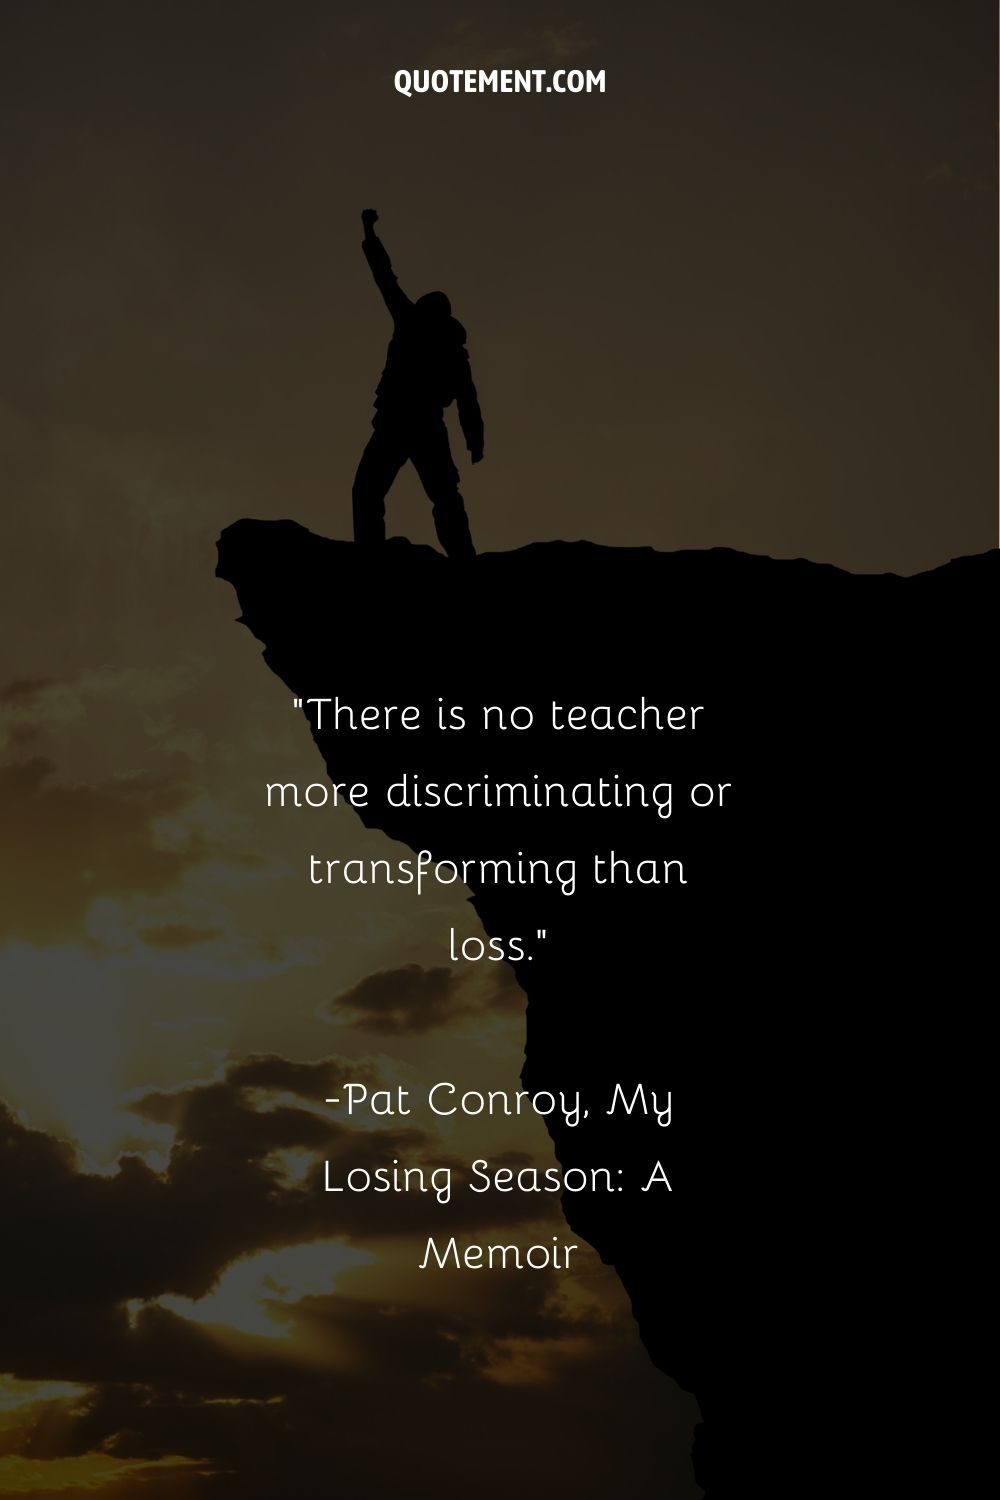 There is no teacher more discriminating or transforming than loss.